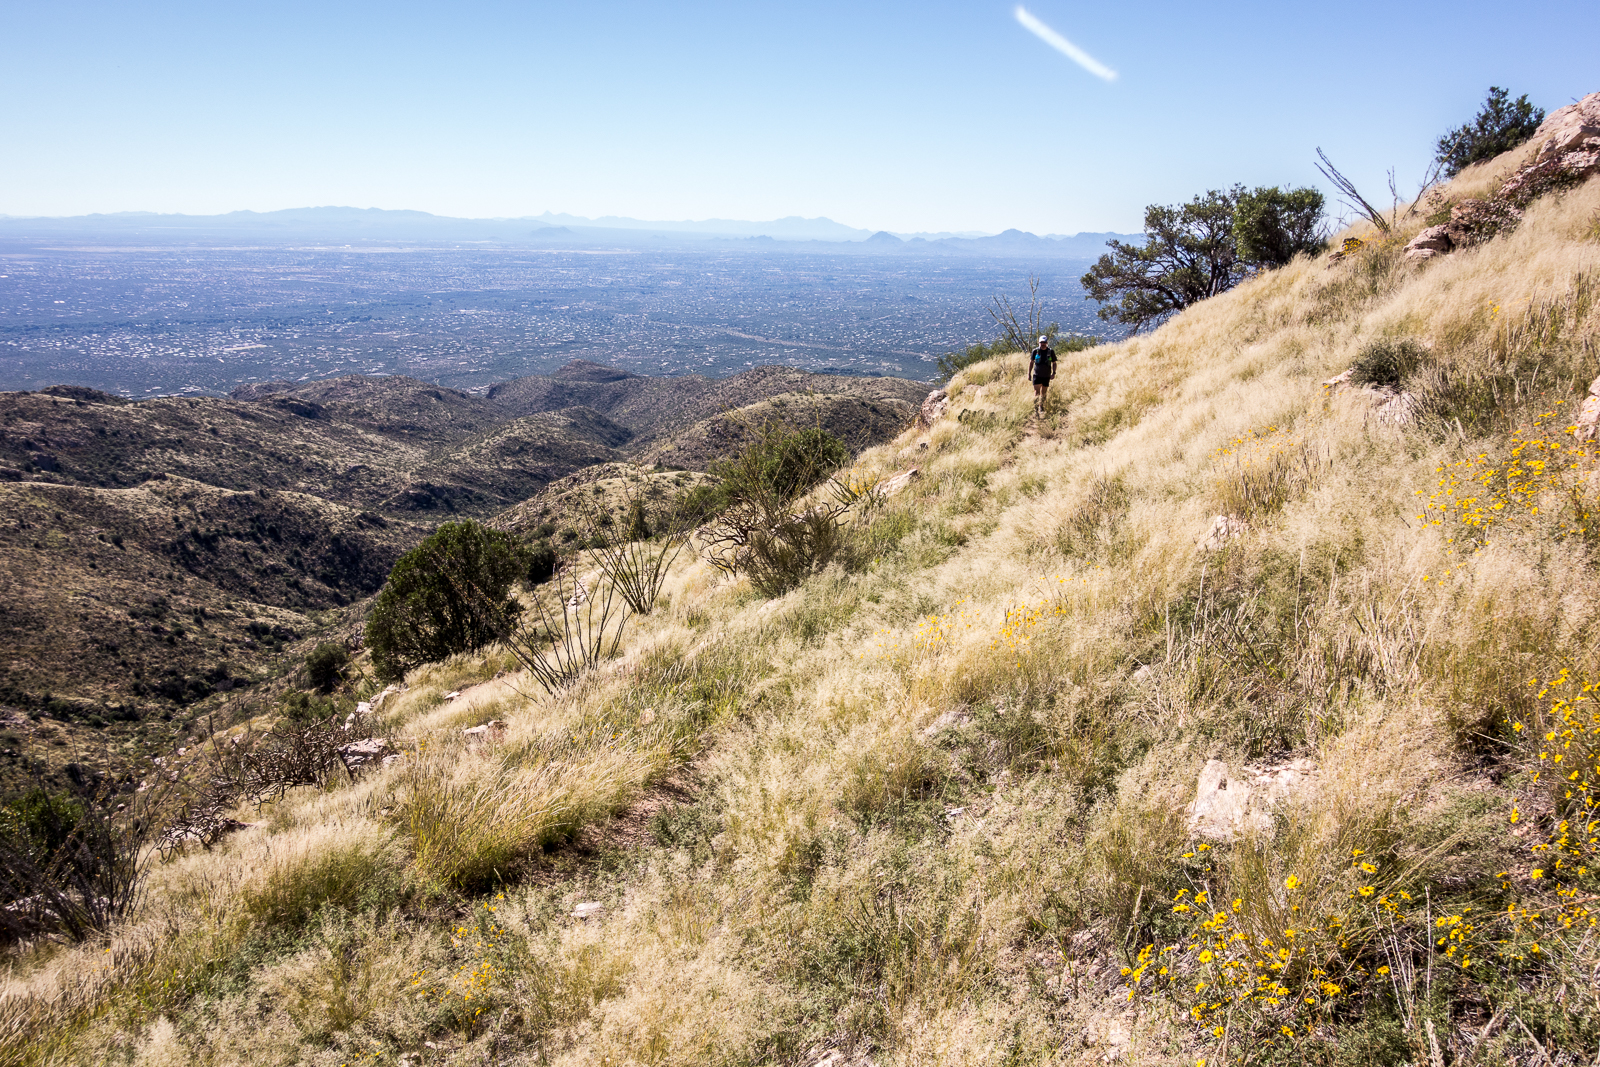 Agua Caliente Trail below False Hope Hill - heading for the summit! October 2015.